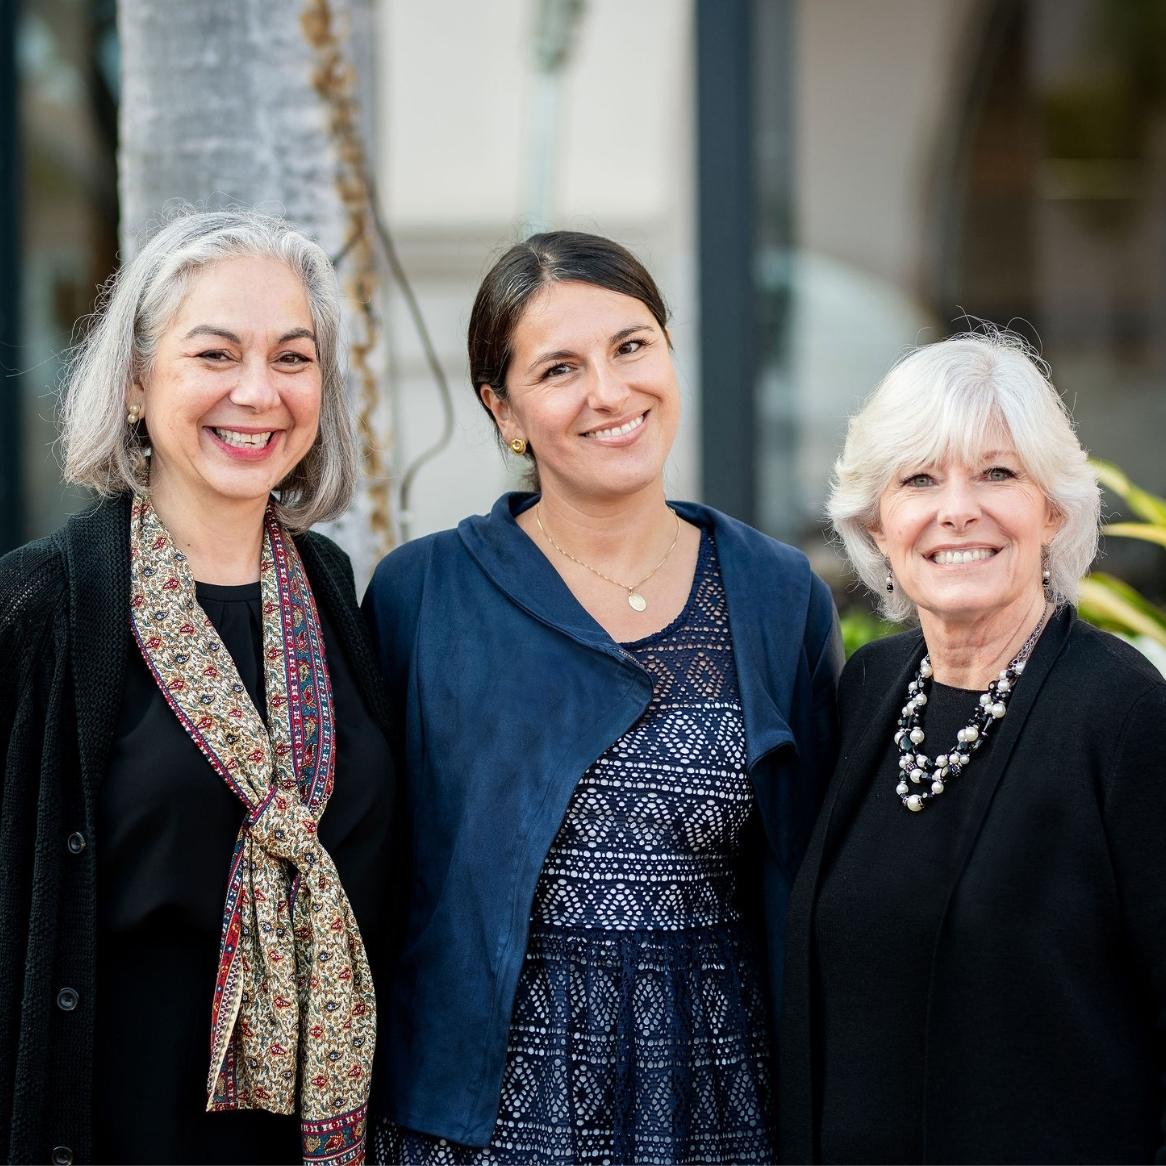 WEV supporters empower women business owners like Elsa Cisneros and Lili Munoz, shown with CEO Kathy Odell.